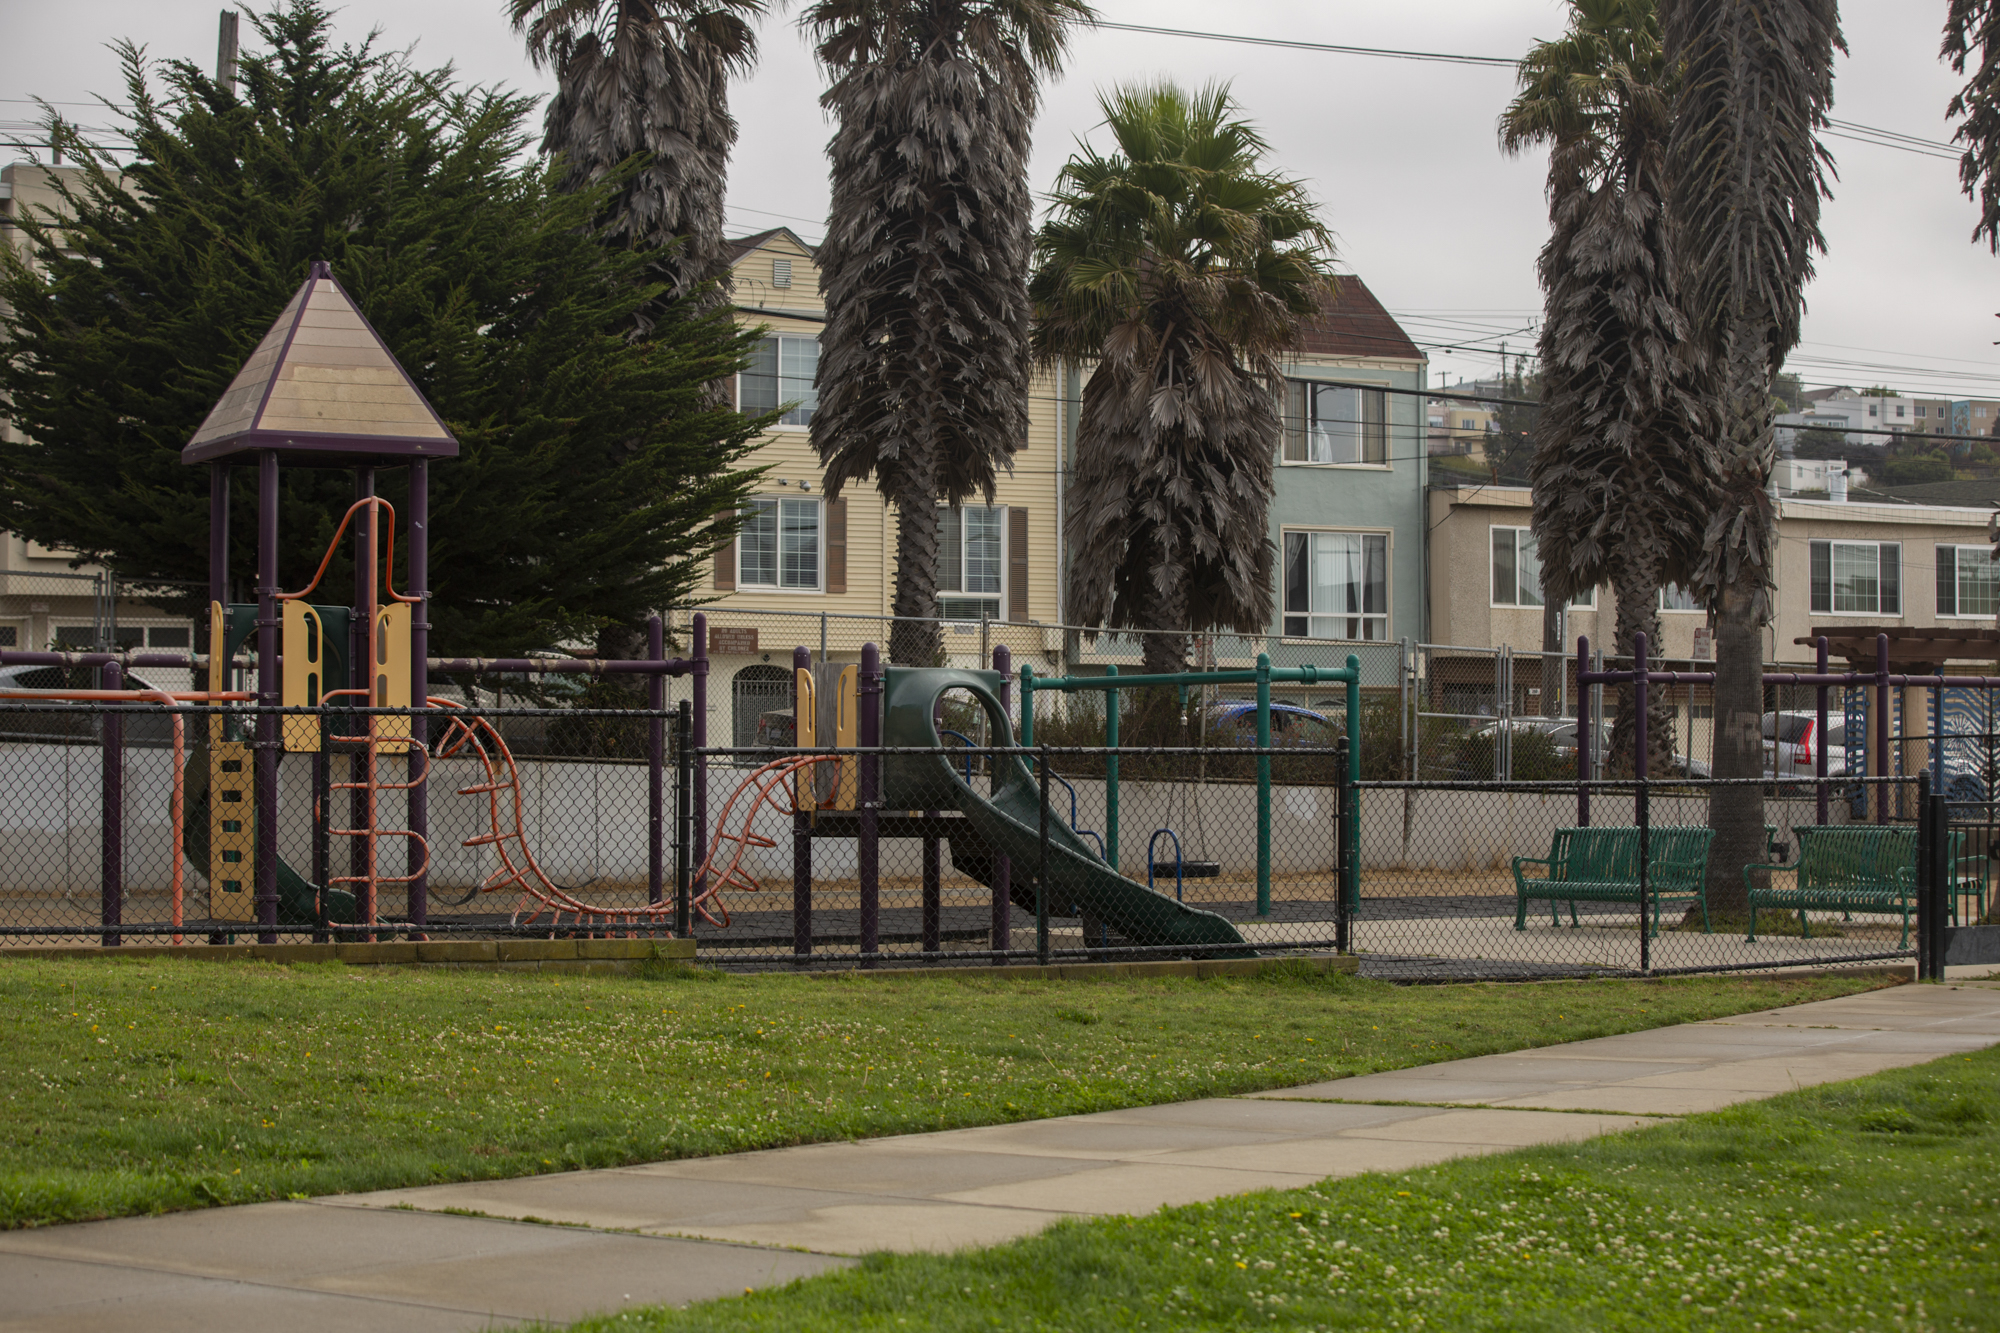 A play structure in a grassy park.